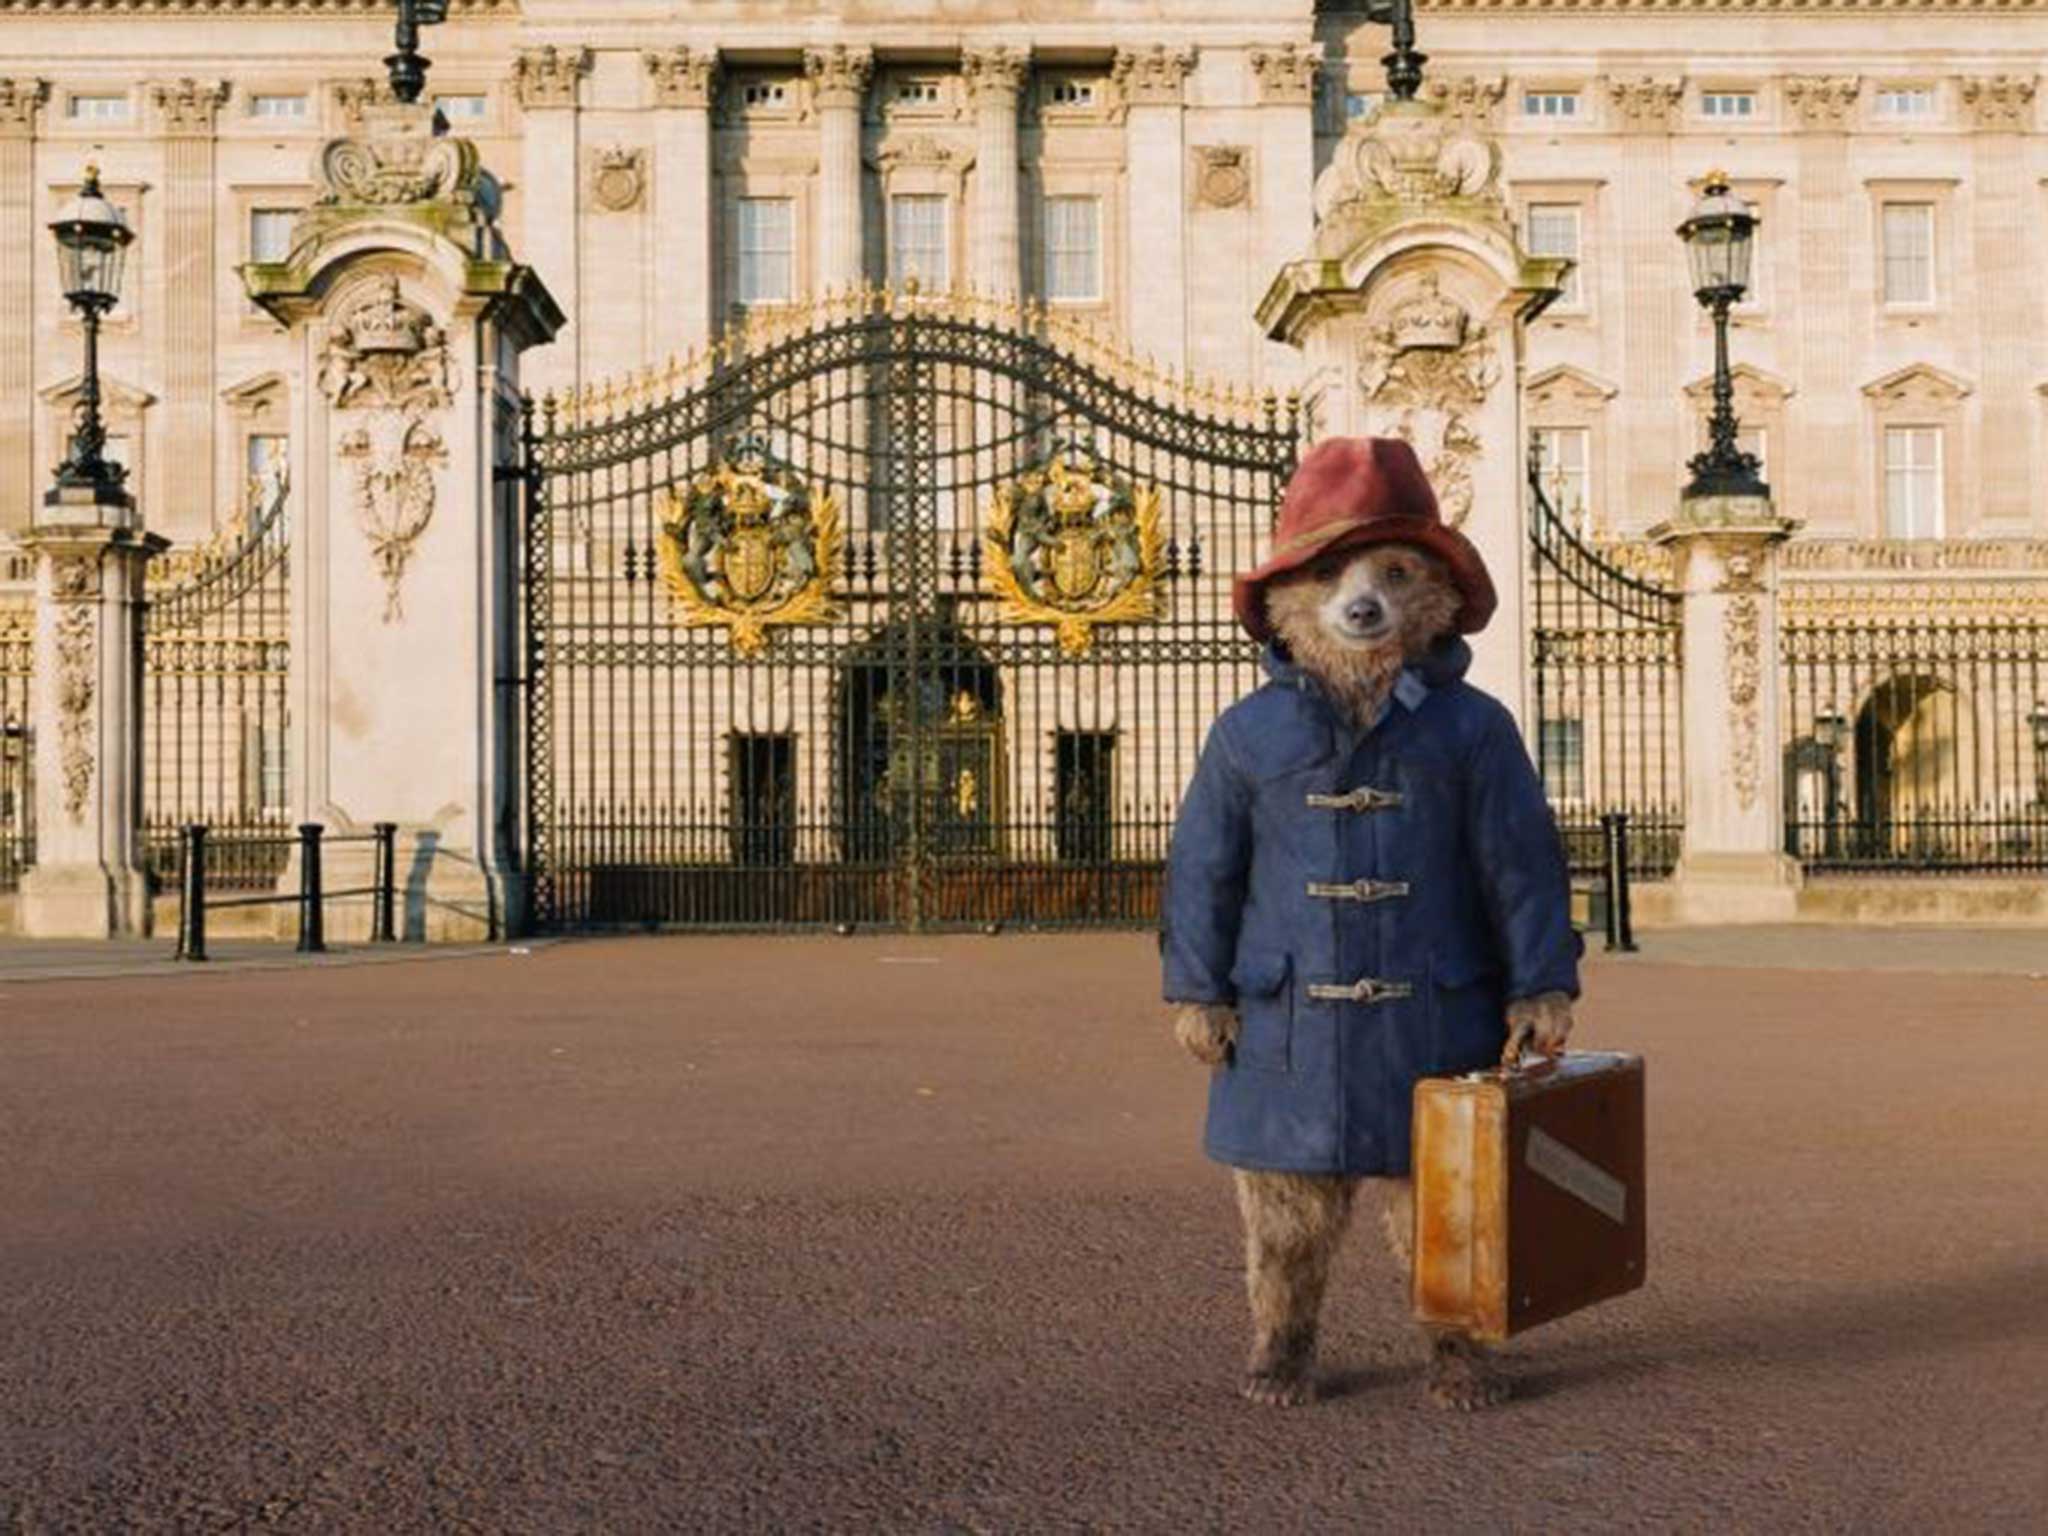 Paddington at Buckingham Palace, in the film released in November